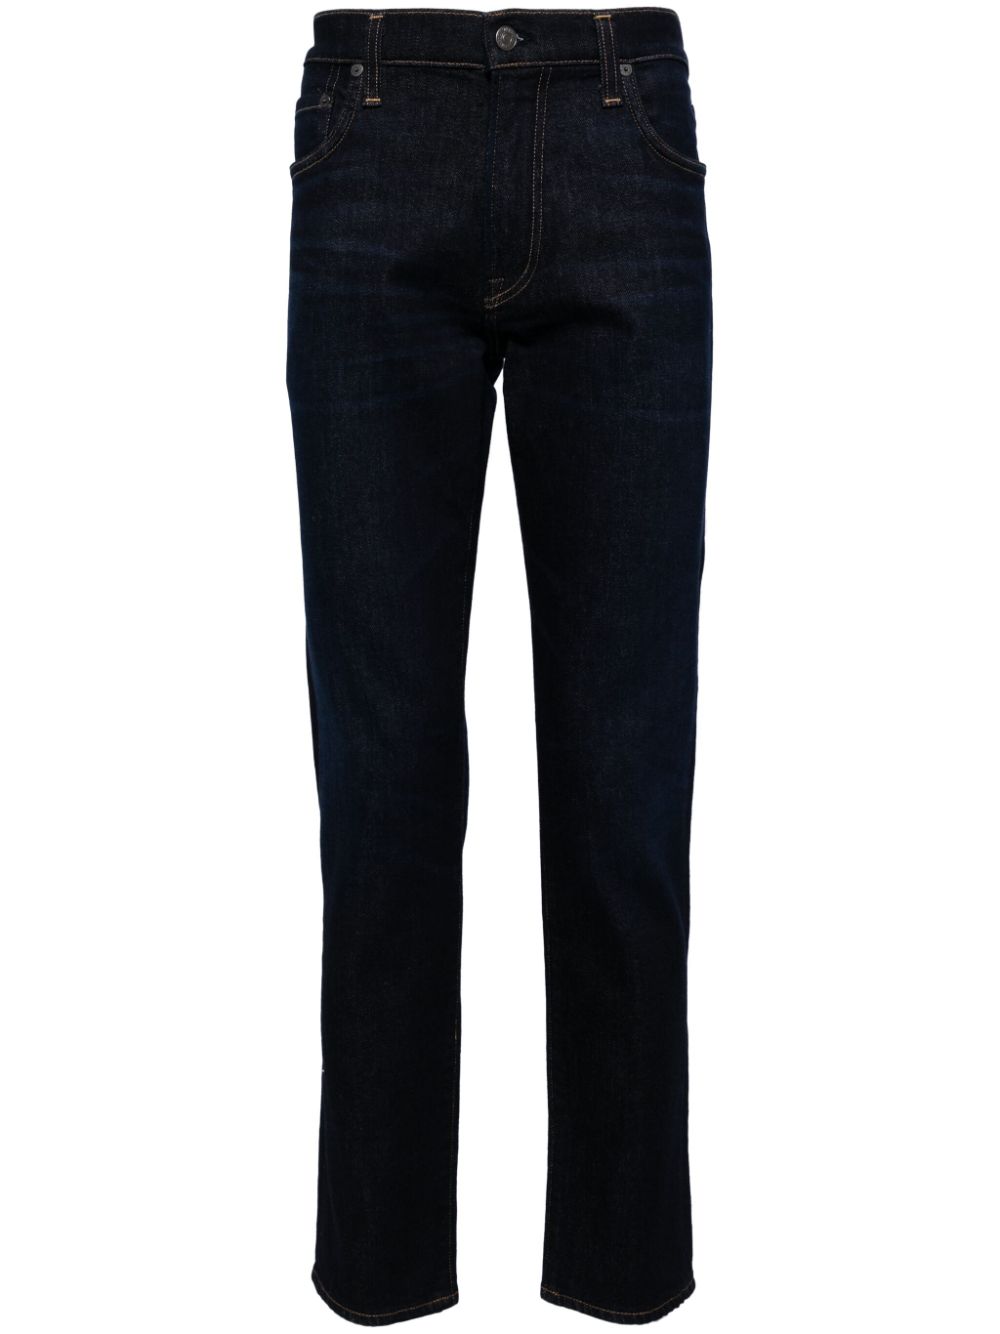 London tapered slim-fit jeans